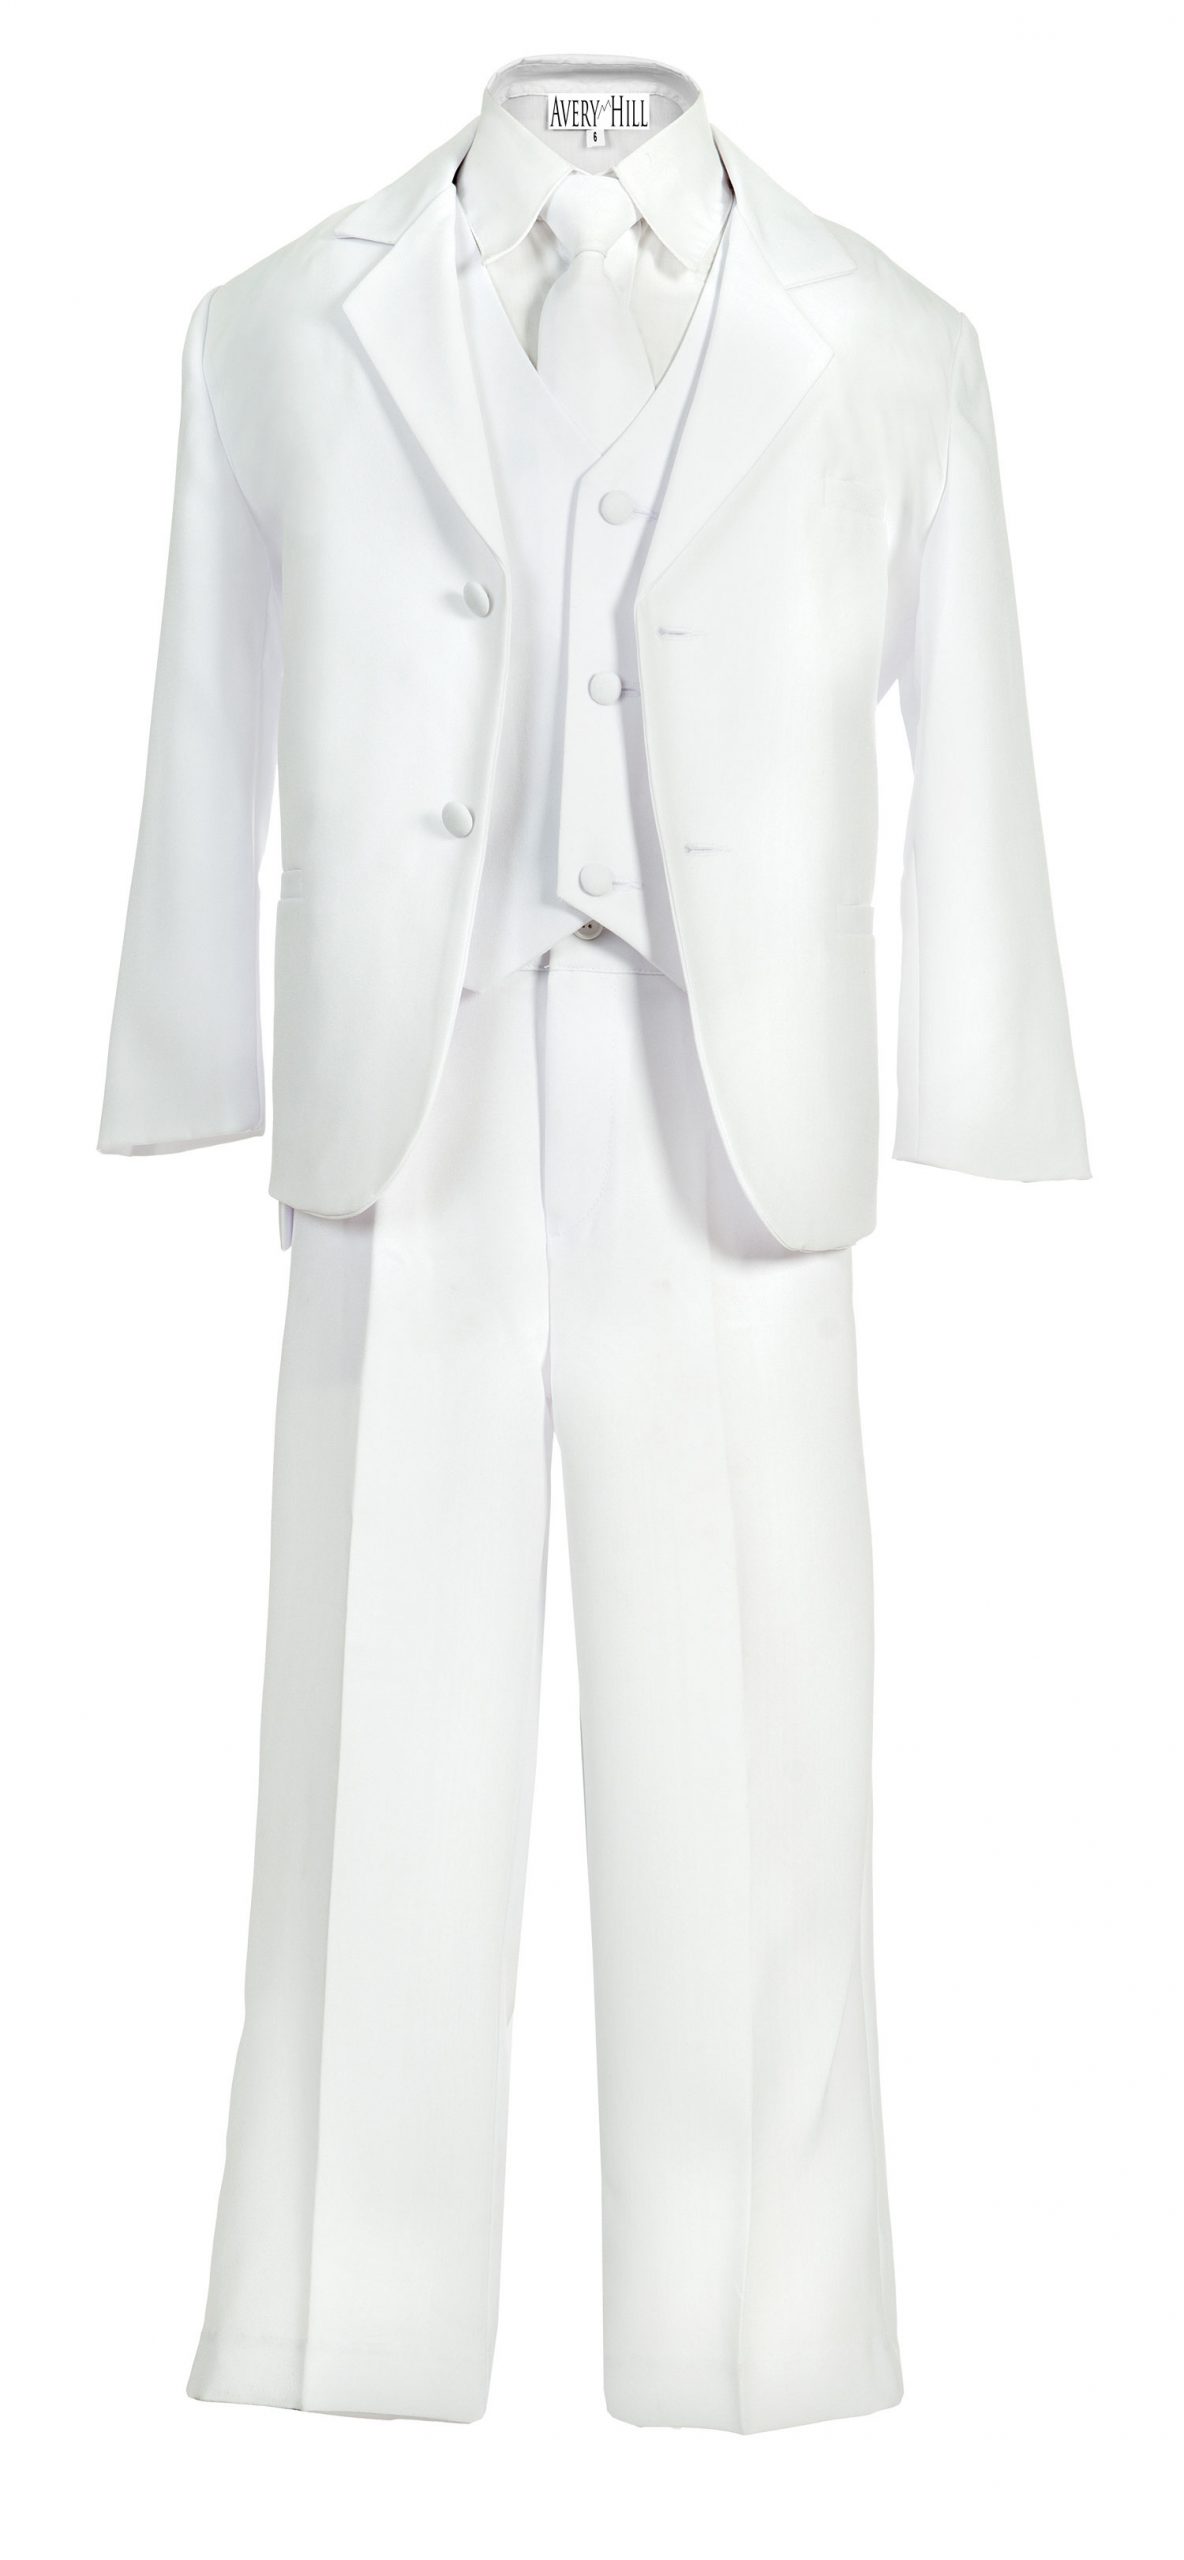 Avery Hill Boys Formal 5 Piece Suit with Shirt and Vest White - L